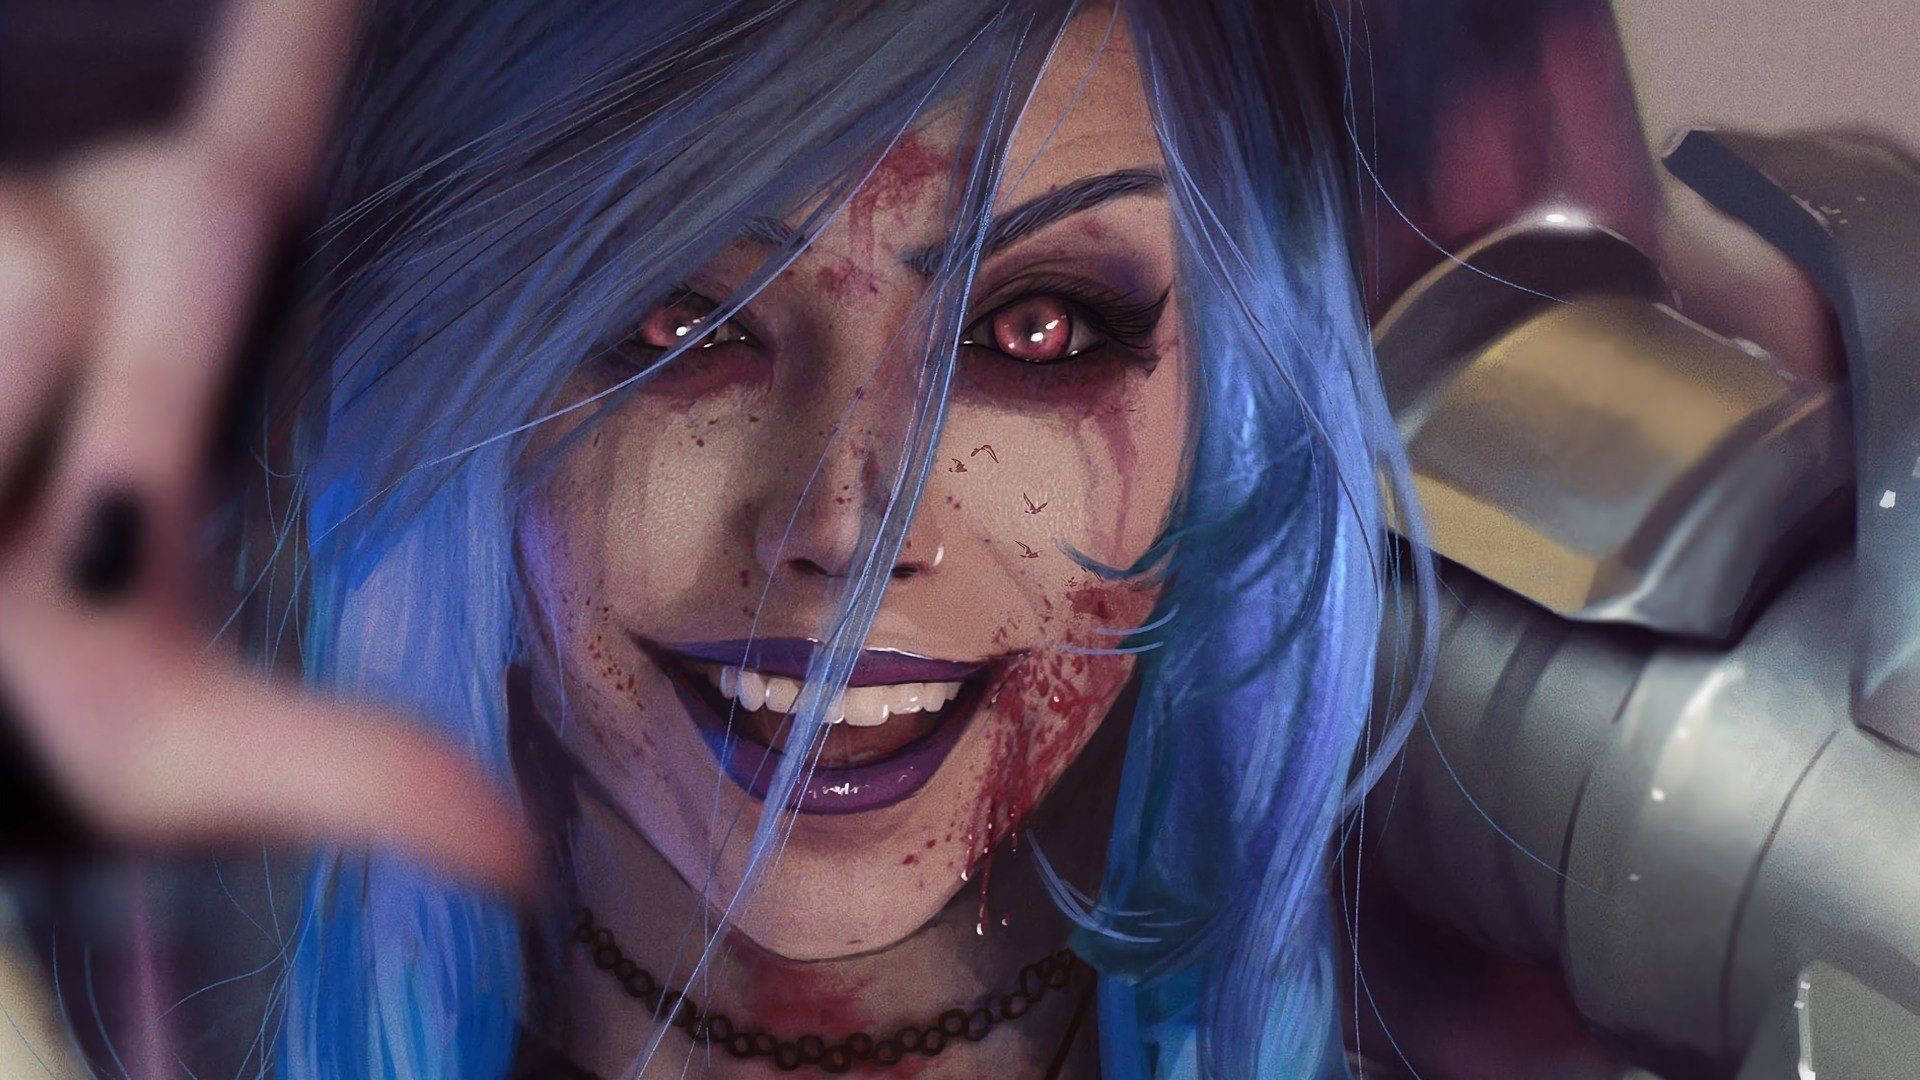 Creepy Jinx With Bloody Face Wallpaper